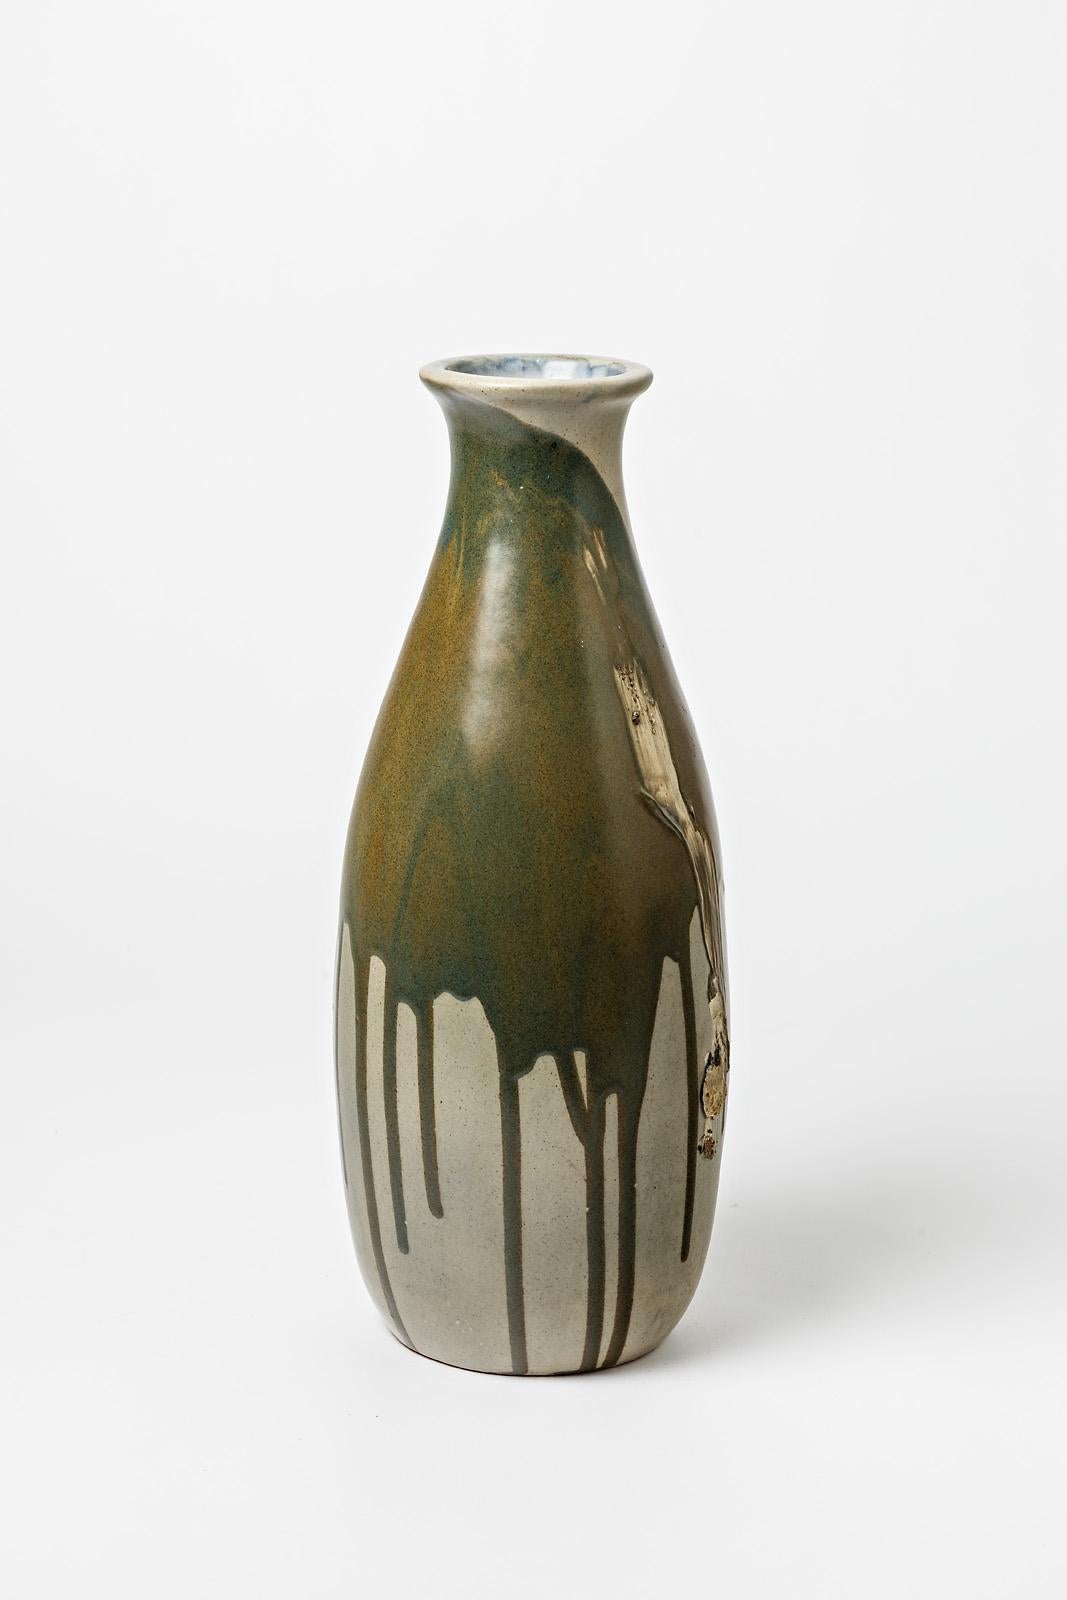 French Glazed stoneware vase with dripping decoration by Jean Pointu, circa 1950. For Sale